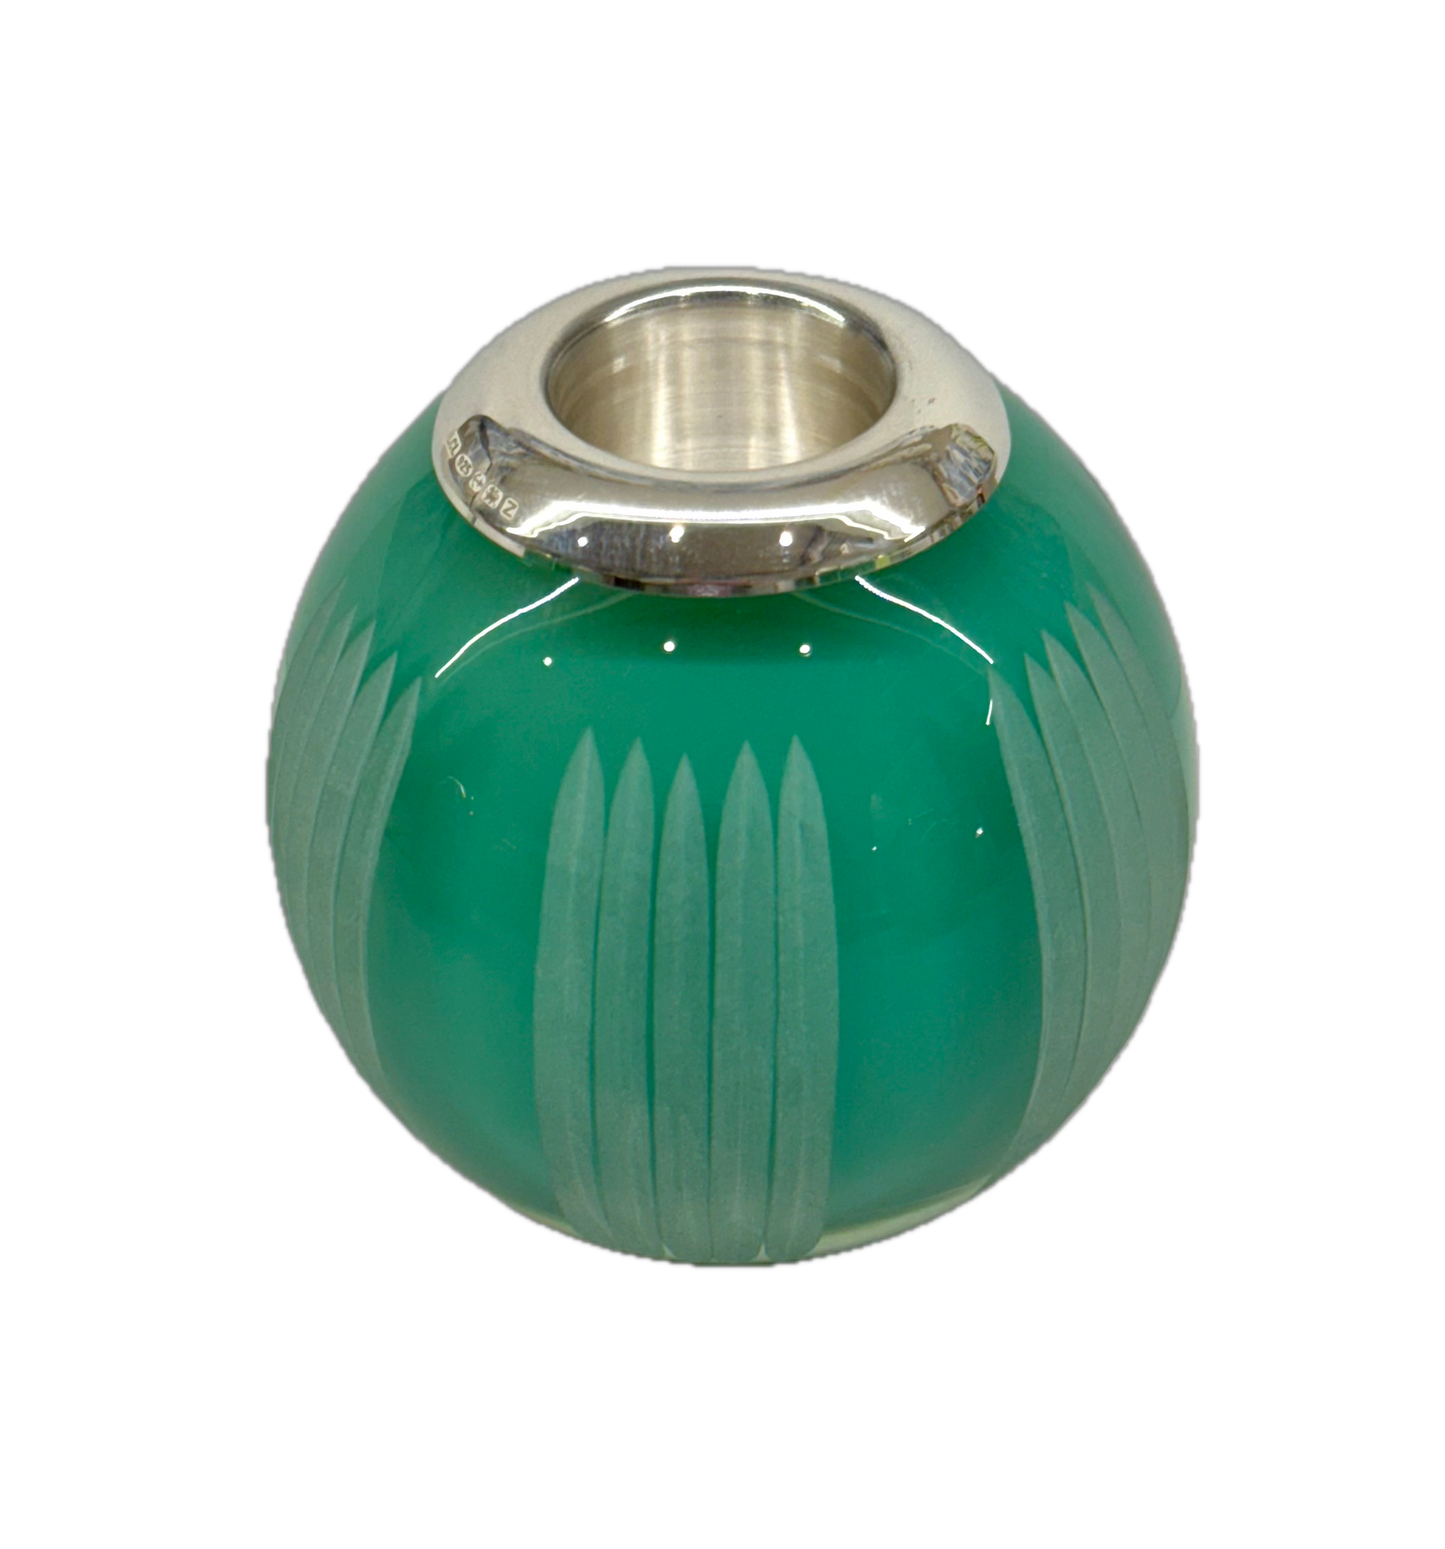 Lucy Cope Matchstriker Small Green Splits